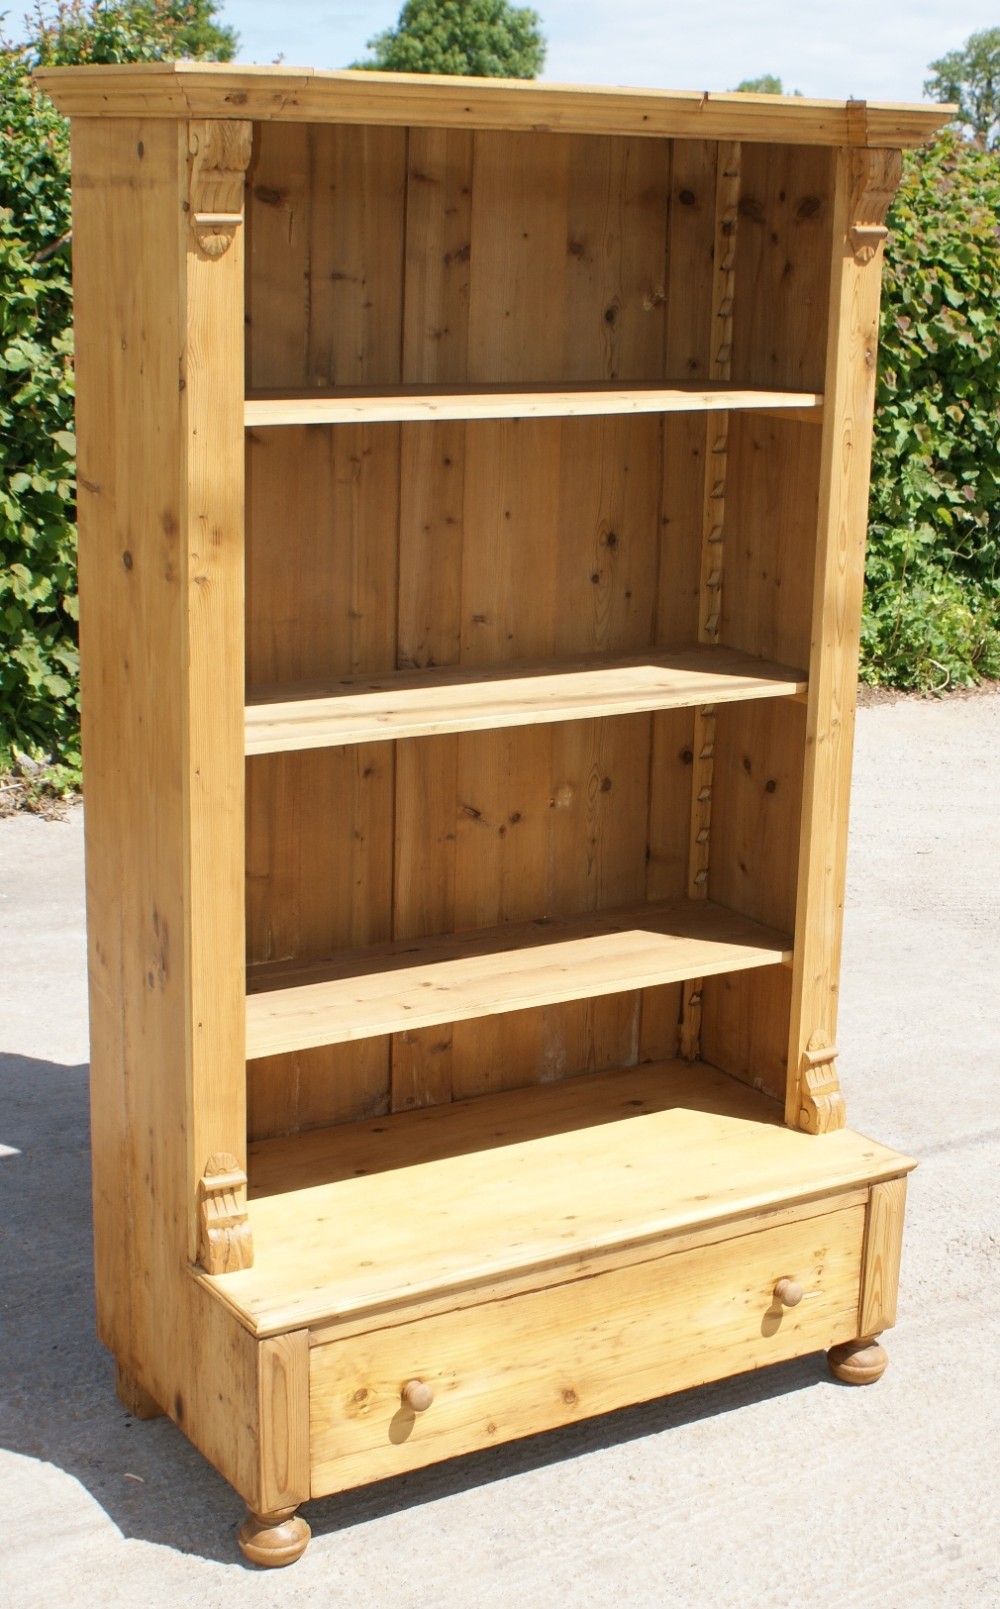 late 19th century antique german pine bookcase with adjustable shelves